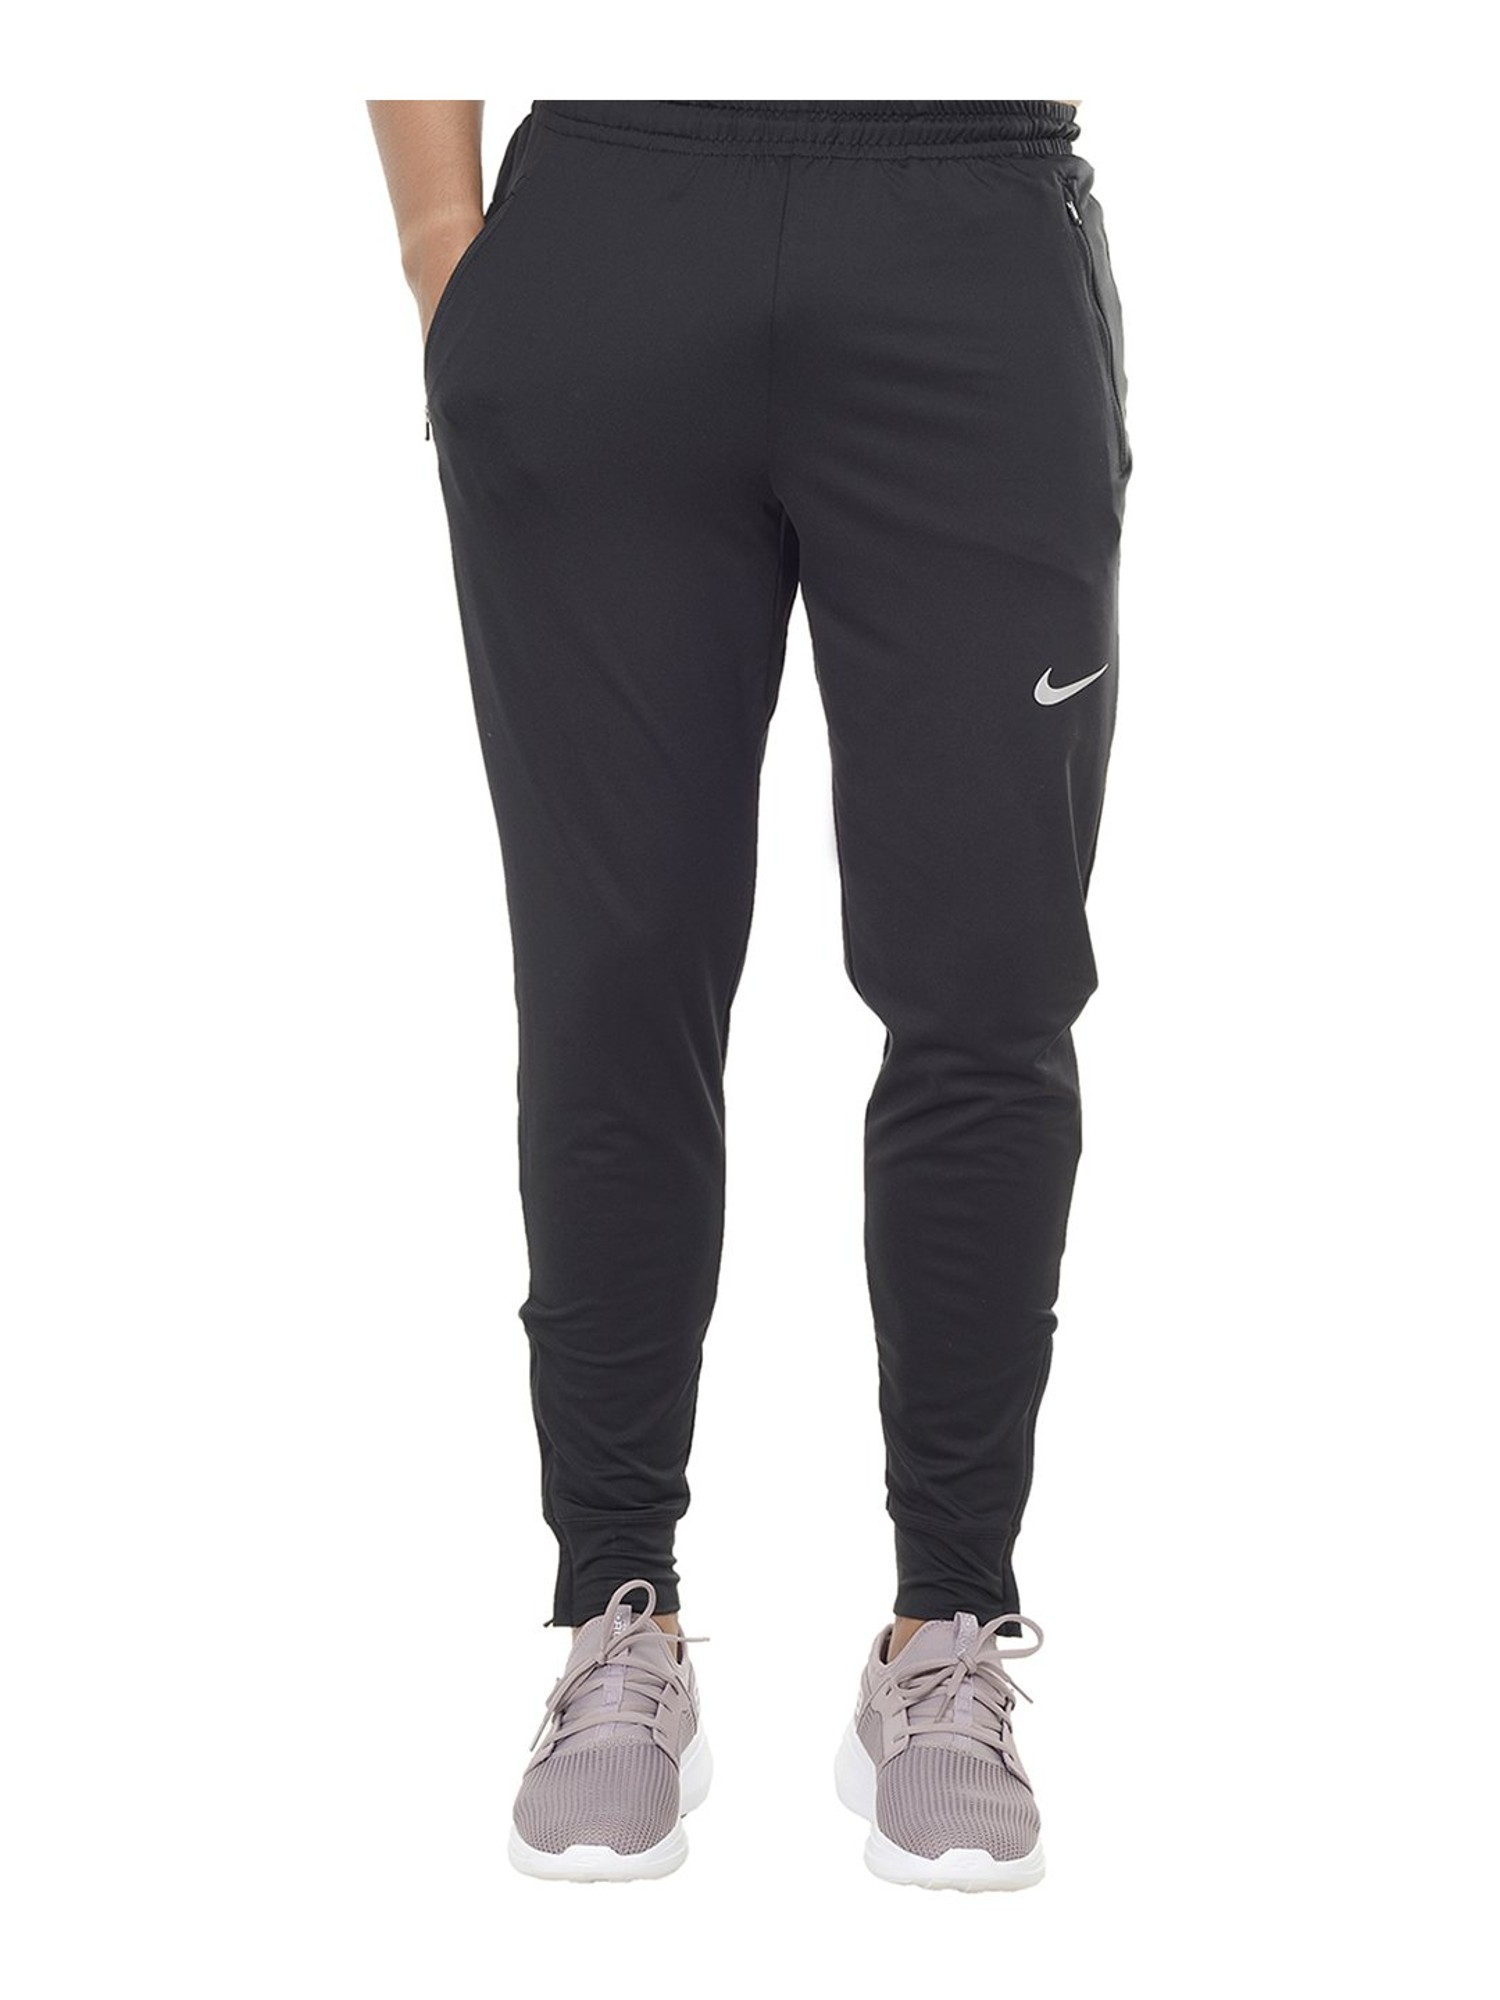 Buy Nike Black Lycra Track pants Dry fit Online  2795 from ShopClues